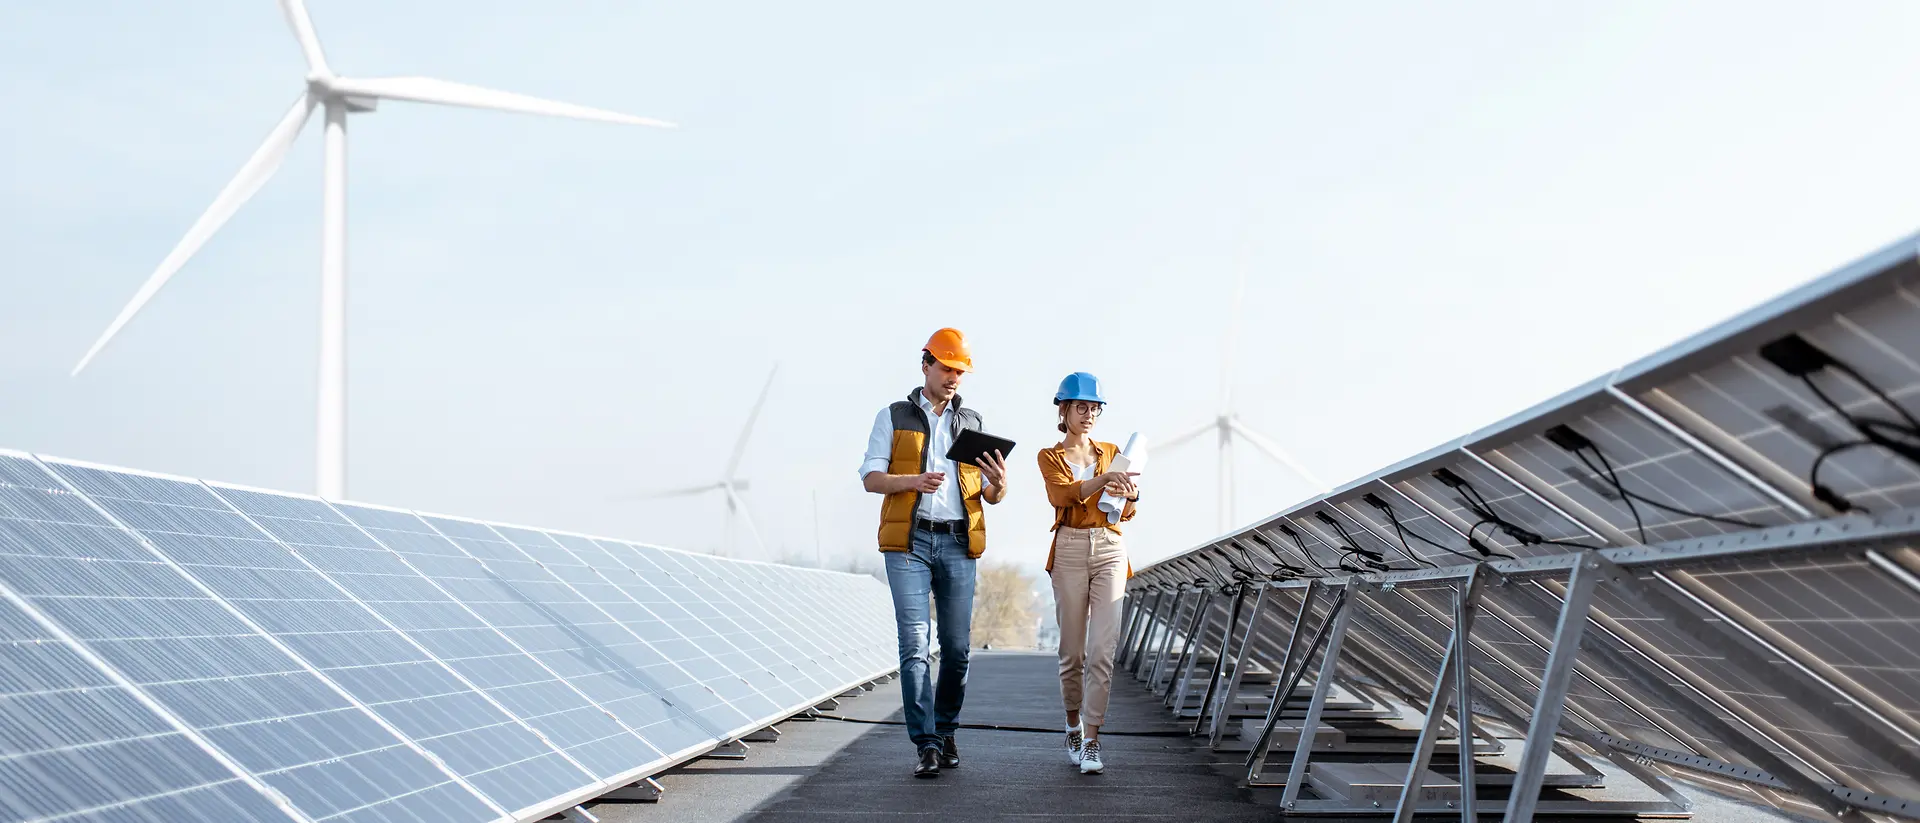 two people walking through a field of solar panels